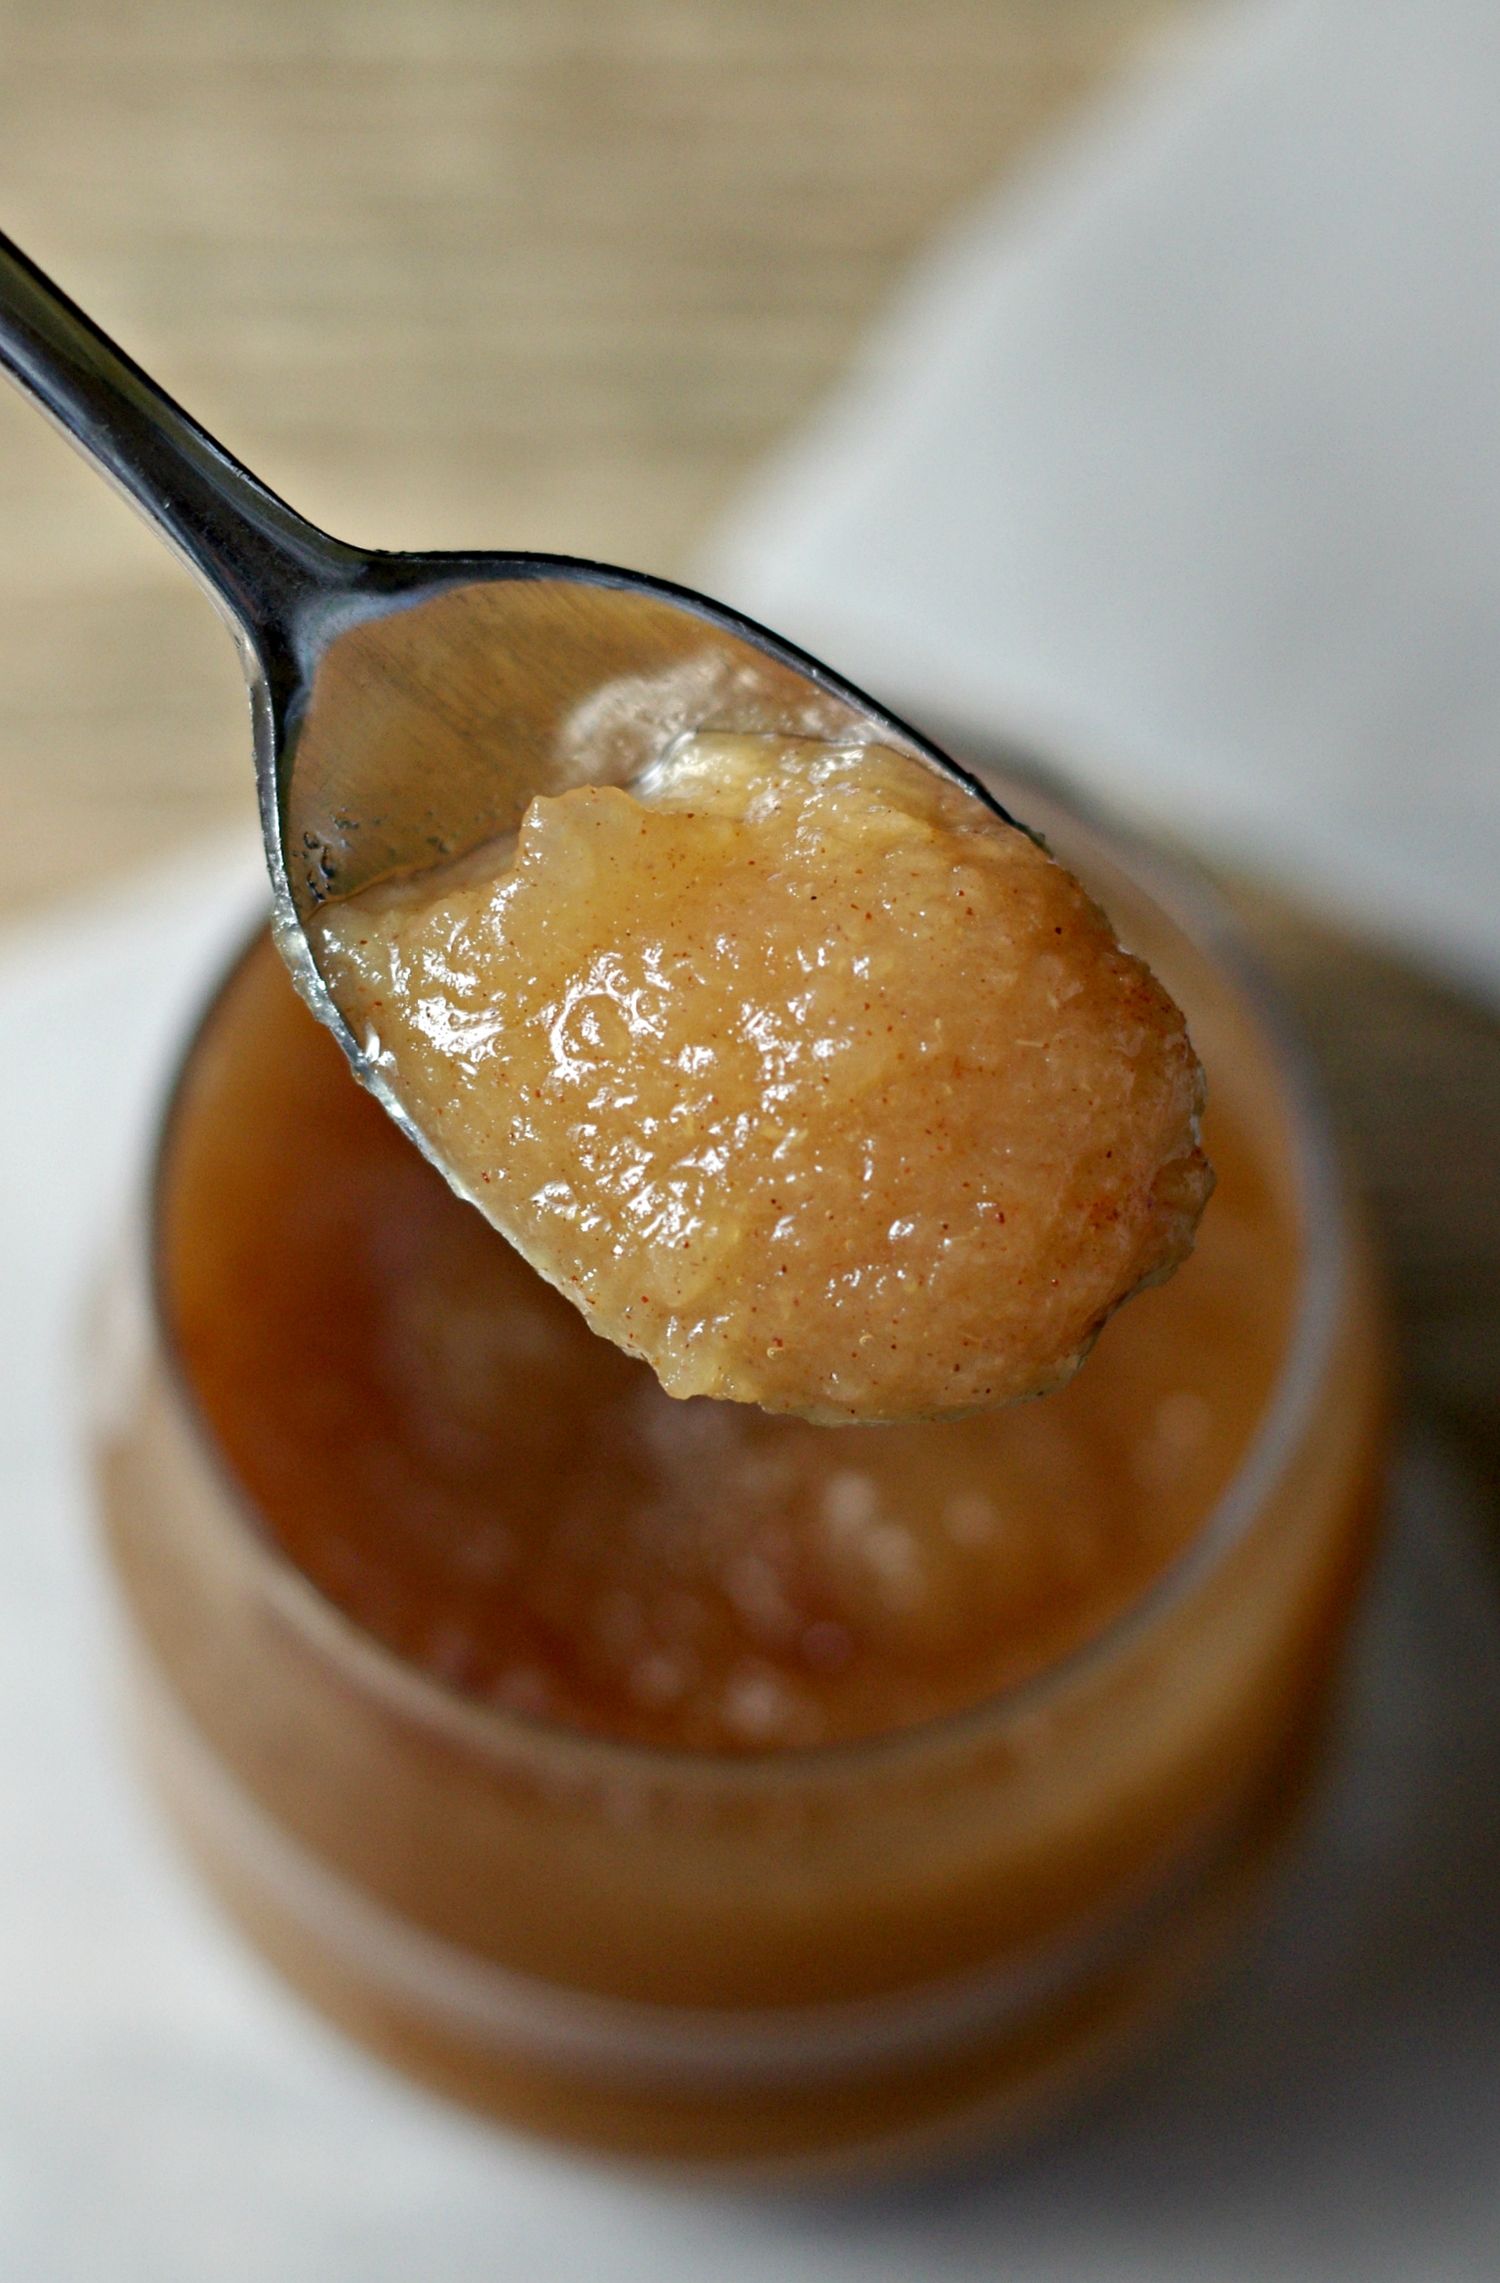 Avoid Fructose: How to Make Applesauce at Home